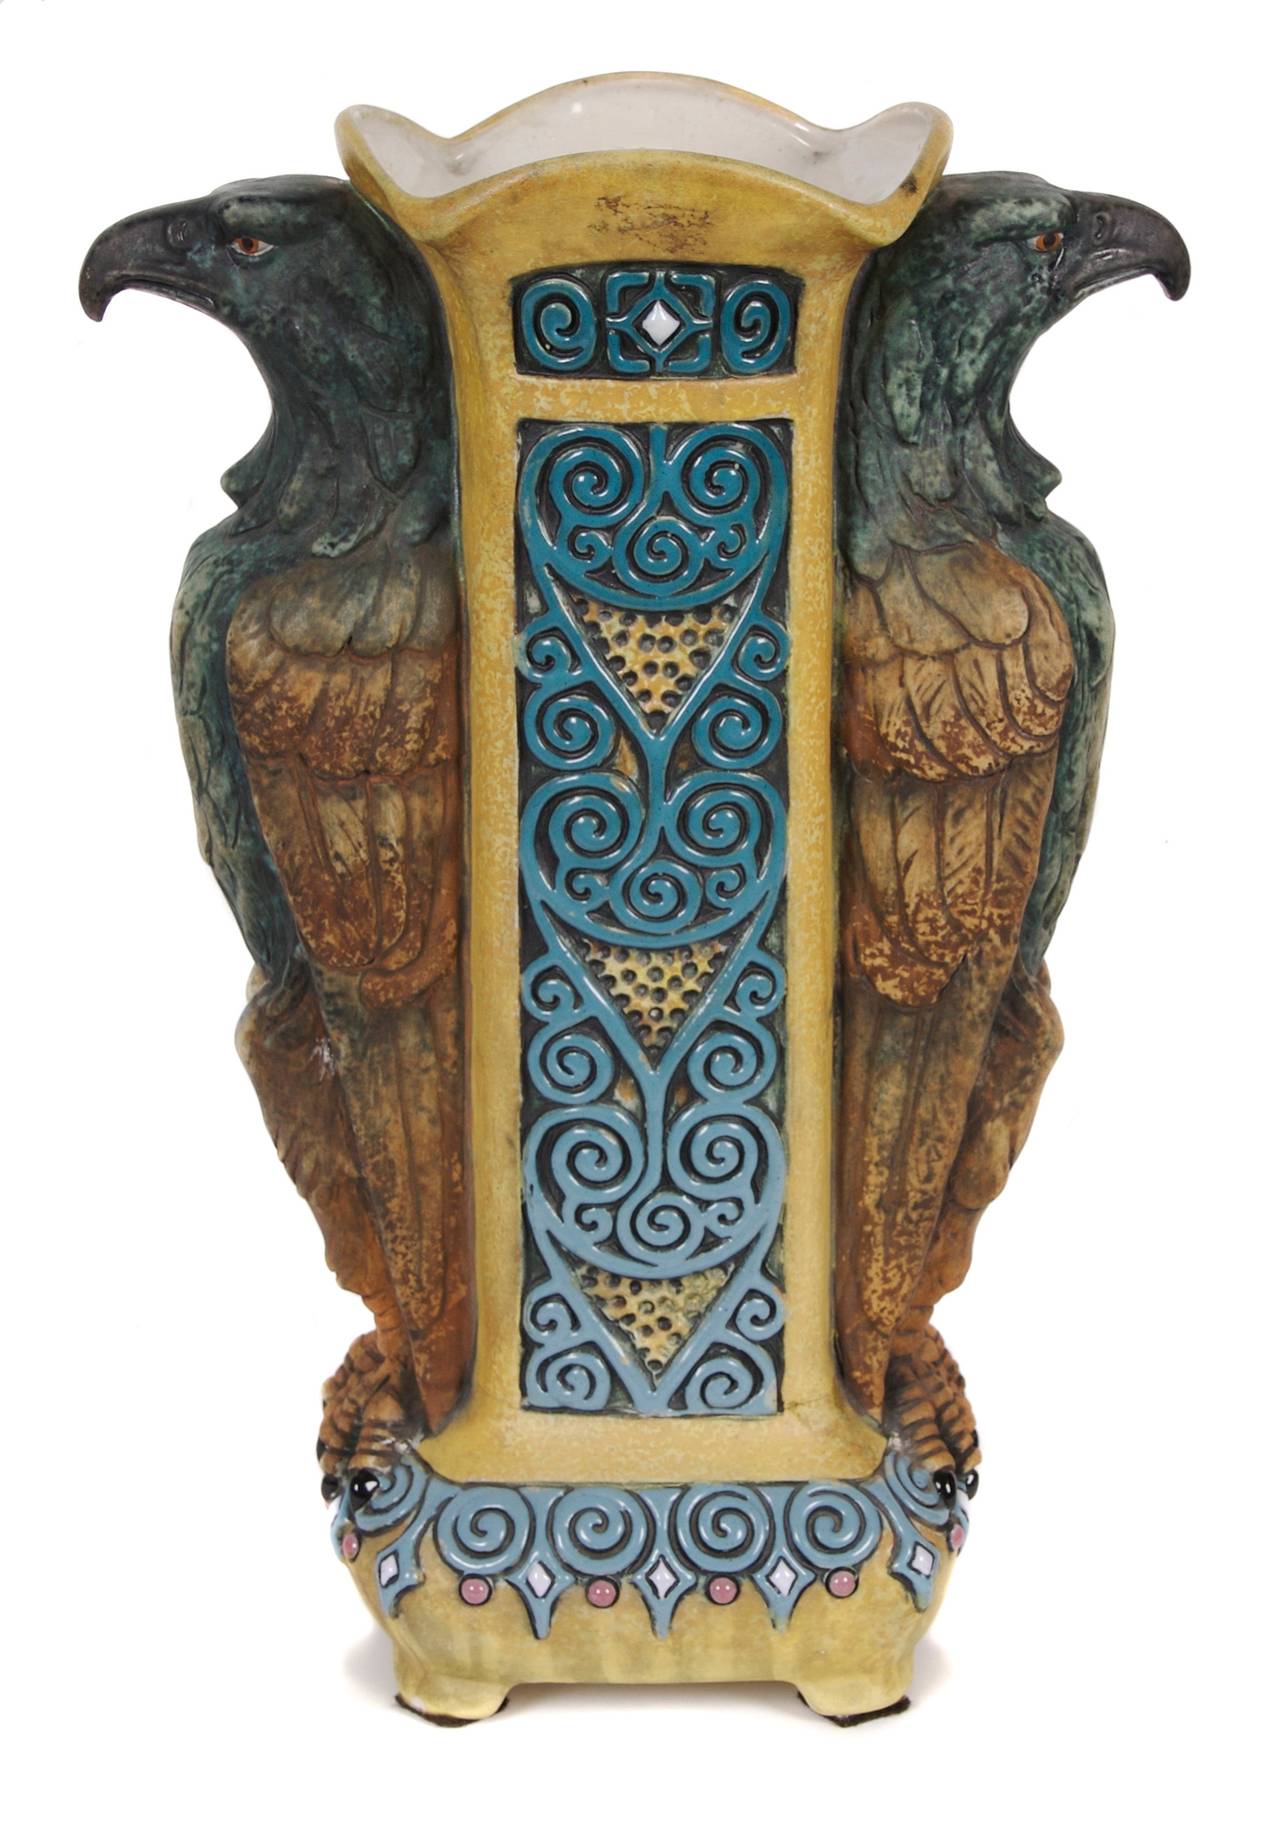 A ceramic double eagle vase produced by The House of Amphora in Czechoslovakia, circa 1918-1939. The eagle was the emblem of Moravia.